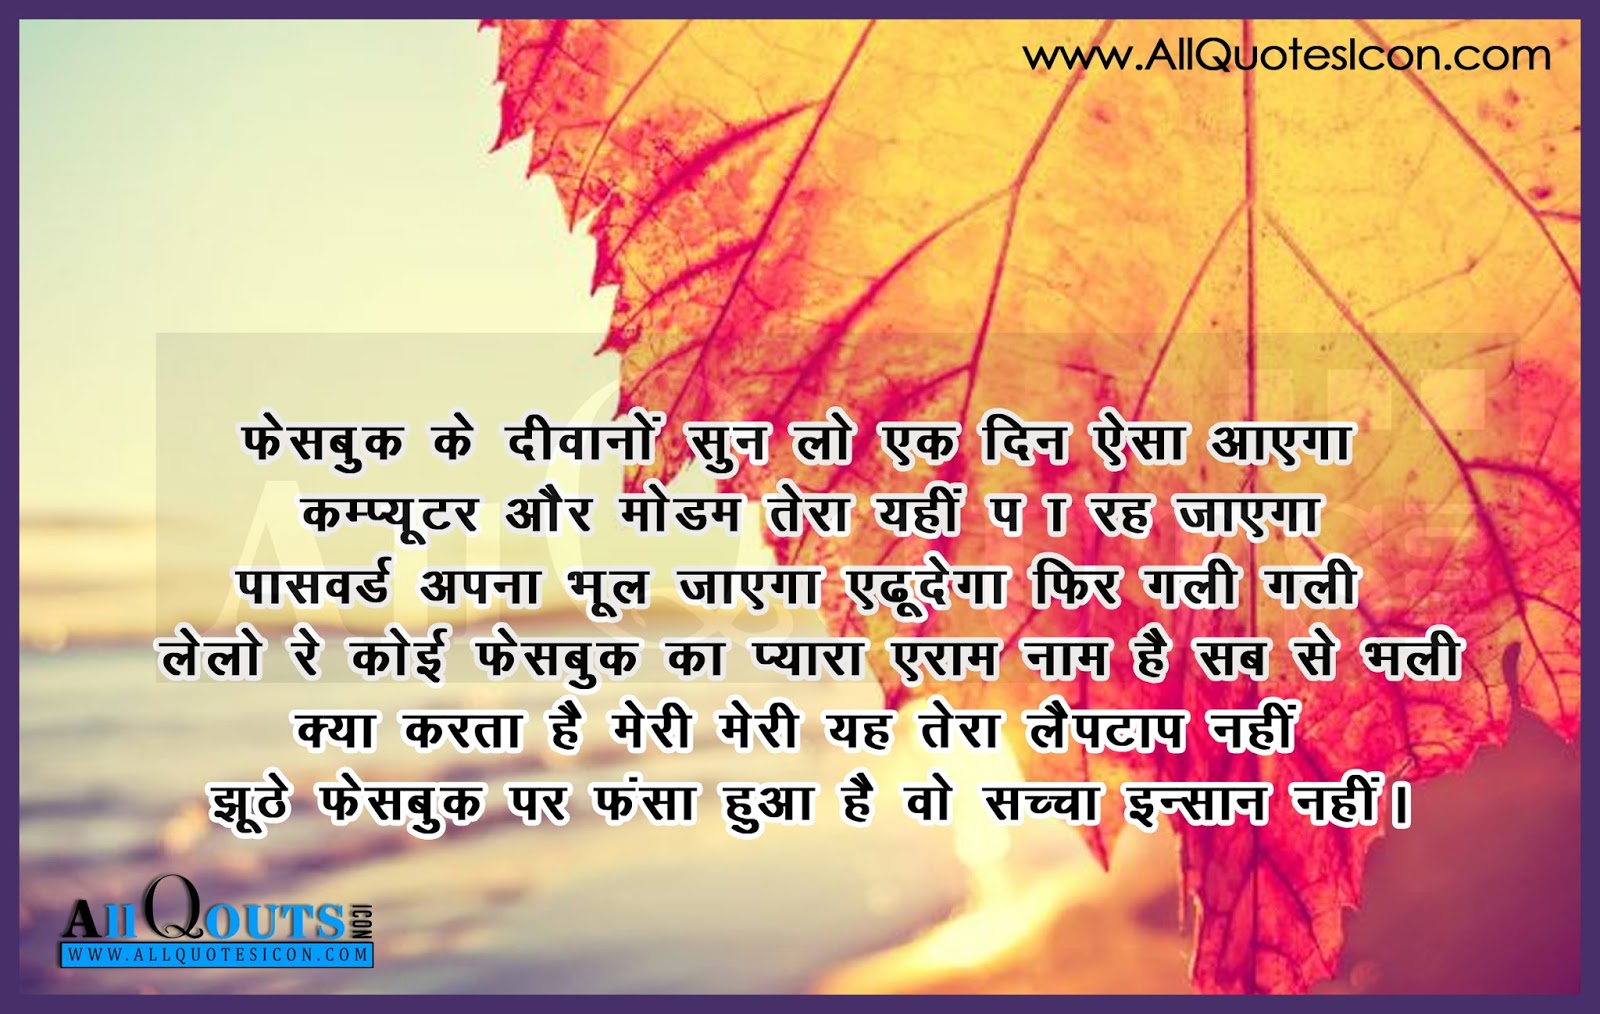 Funny Hindi Quotes Images Wallpapers Pictures Photos - Fall Leaves On Beach , HD Wallpaper & Backgrounds